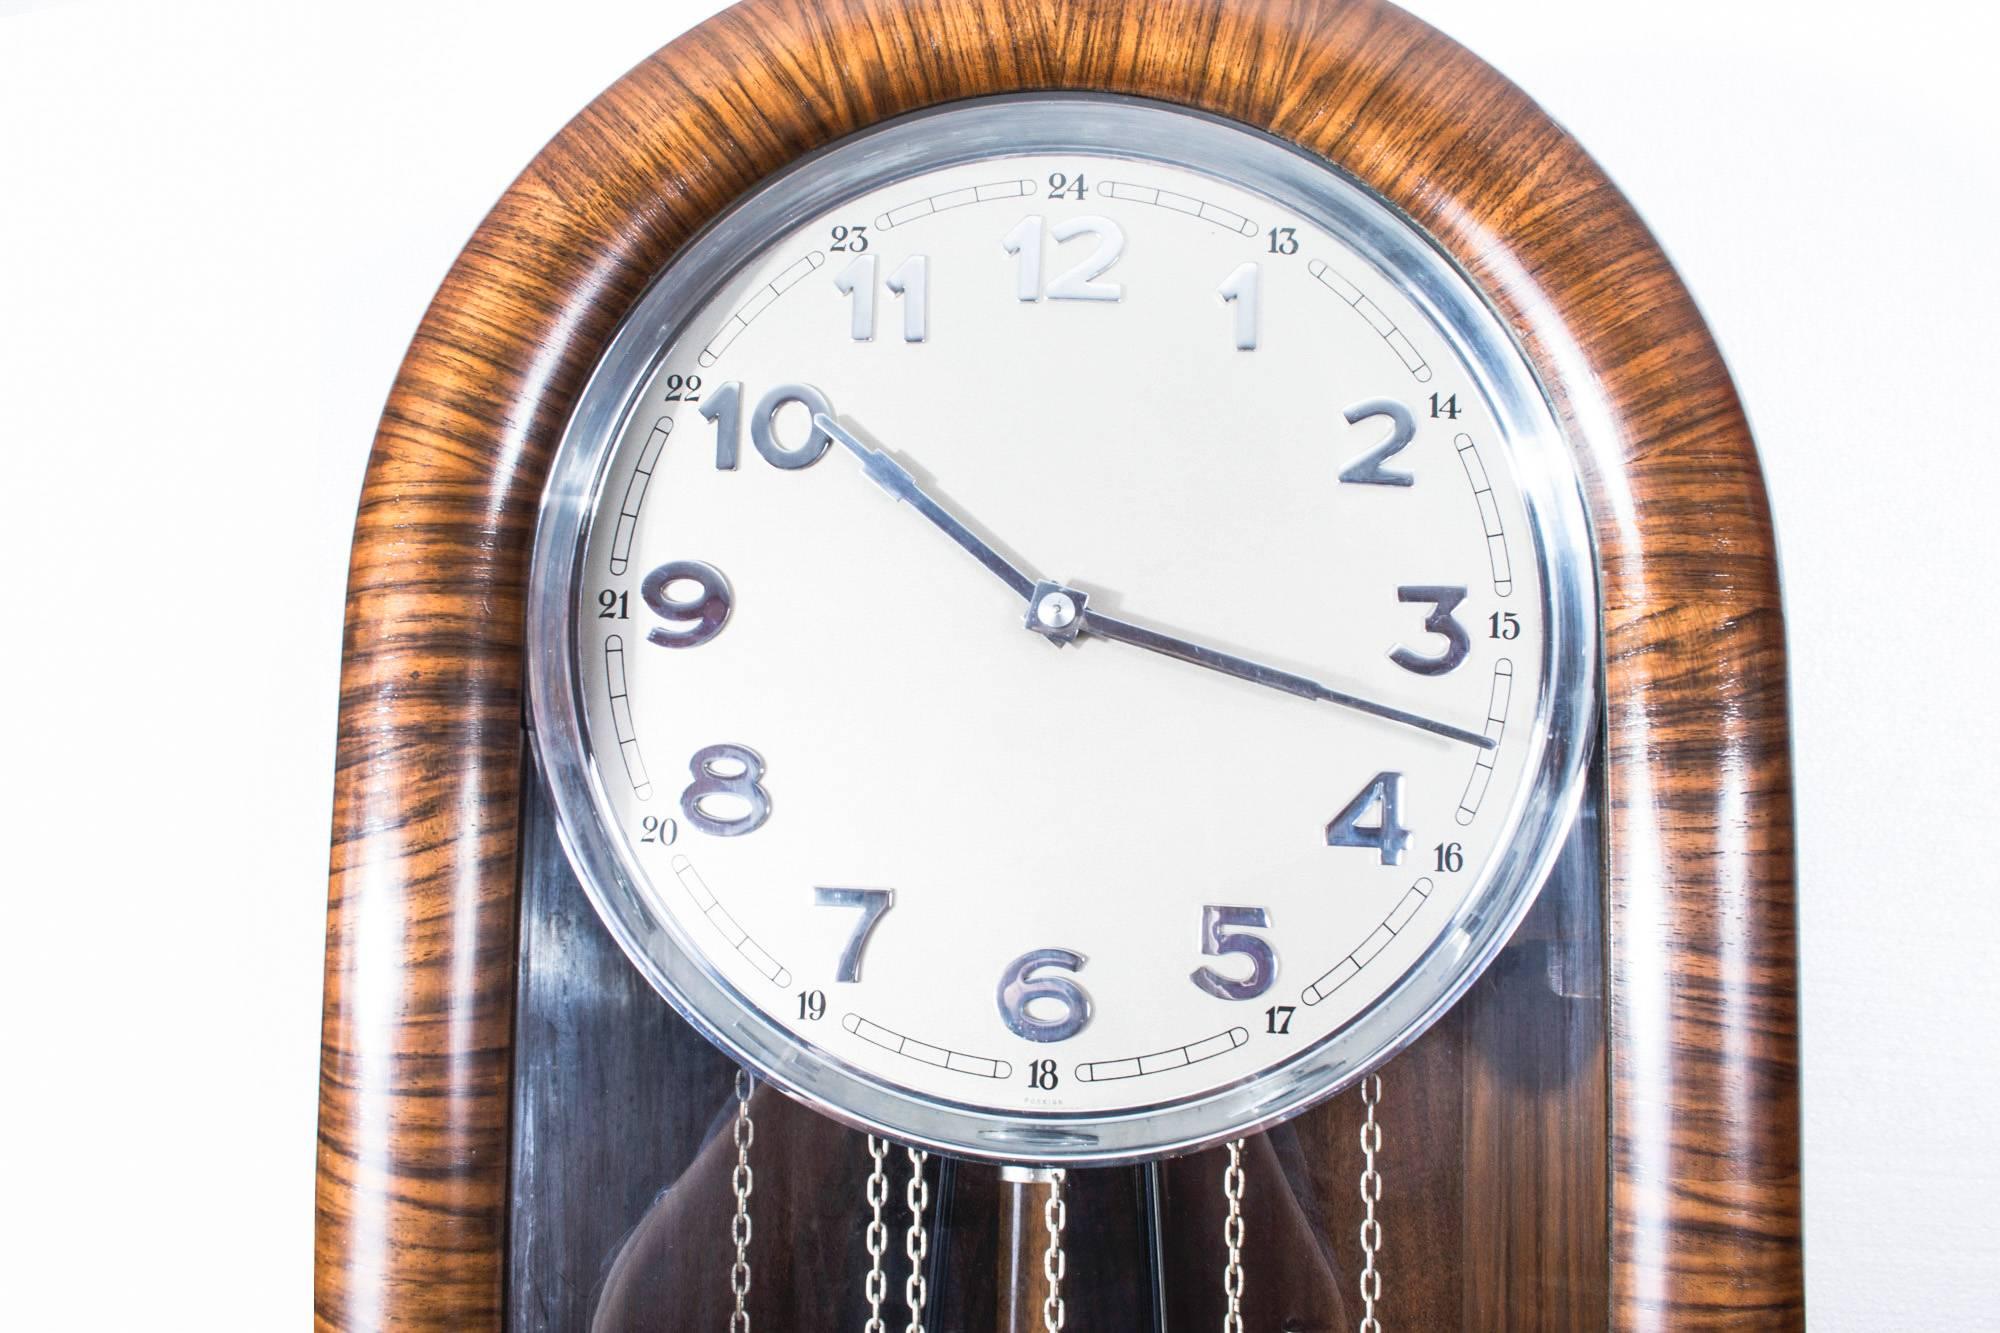 An elegant English Art Deco burr walnut, Westminster chiming, longcase clock, circa 1935 in date.

The clock features a hinged glazed door on a boxed frame and a burnished silvered dial with chrome numerals.

It has three cylindrical chrome